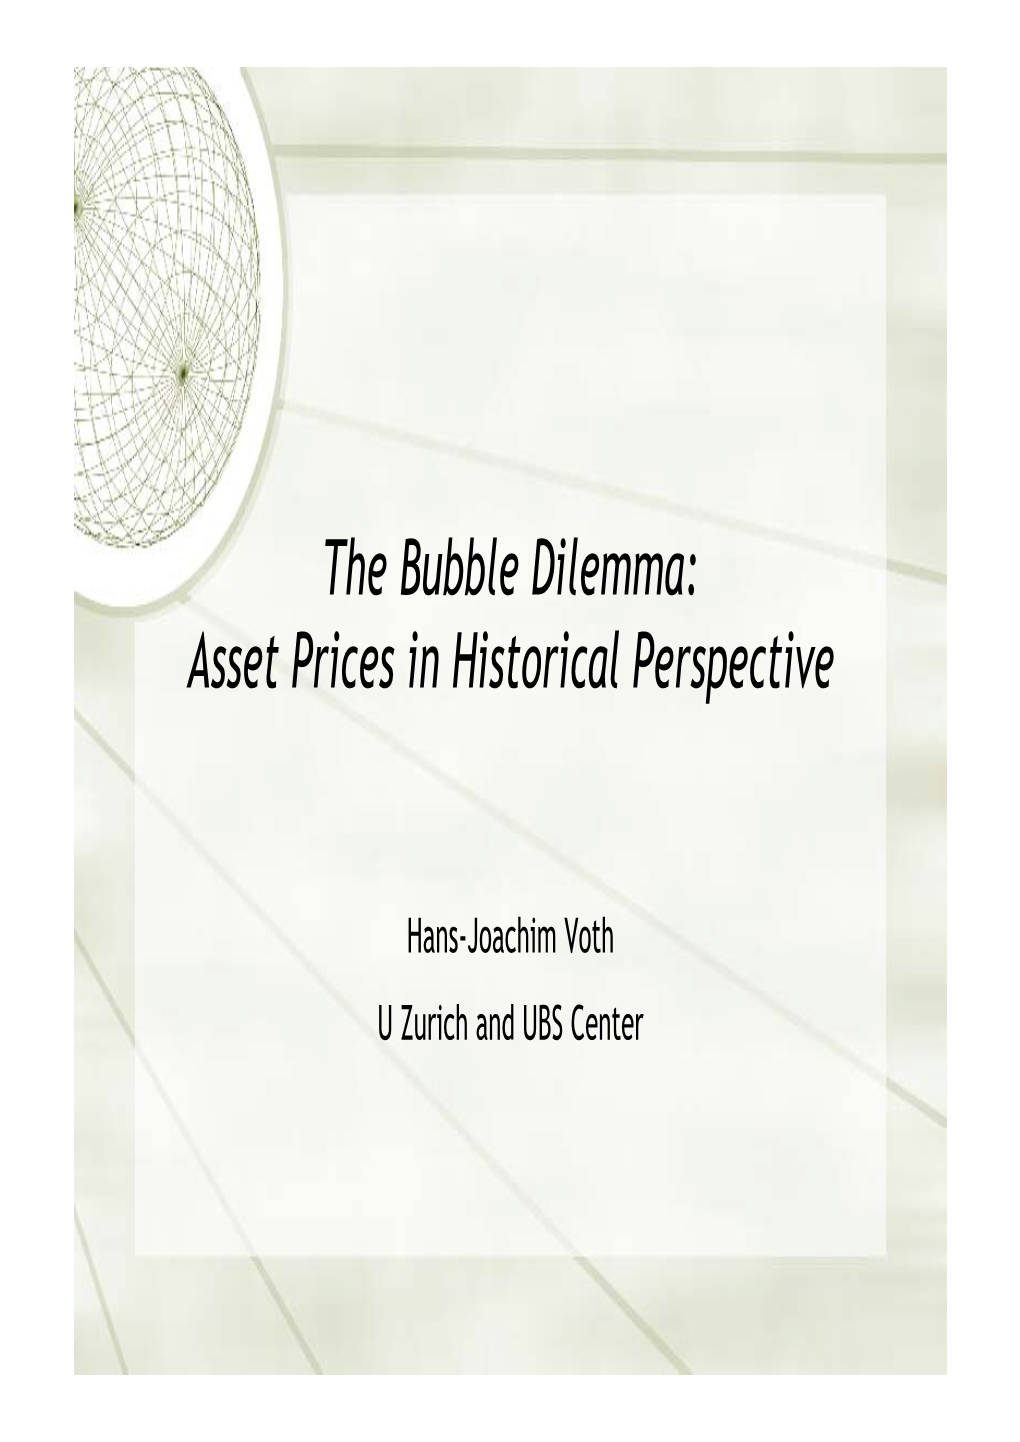 The Bubble Dilemma: Asset Prices in Historical Perspective